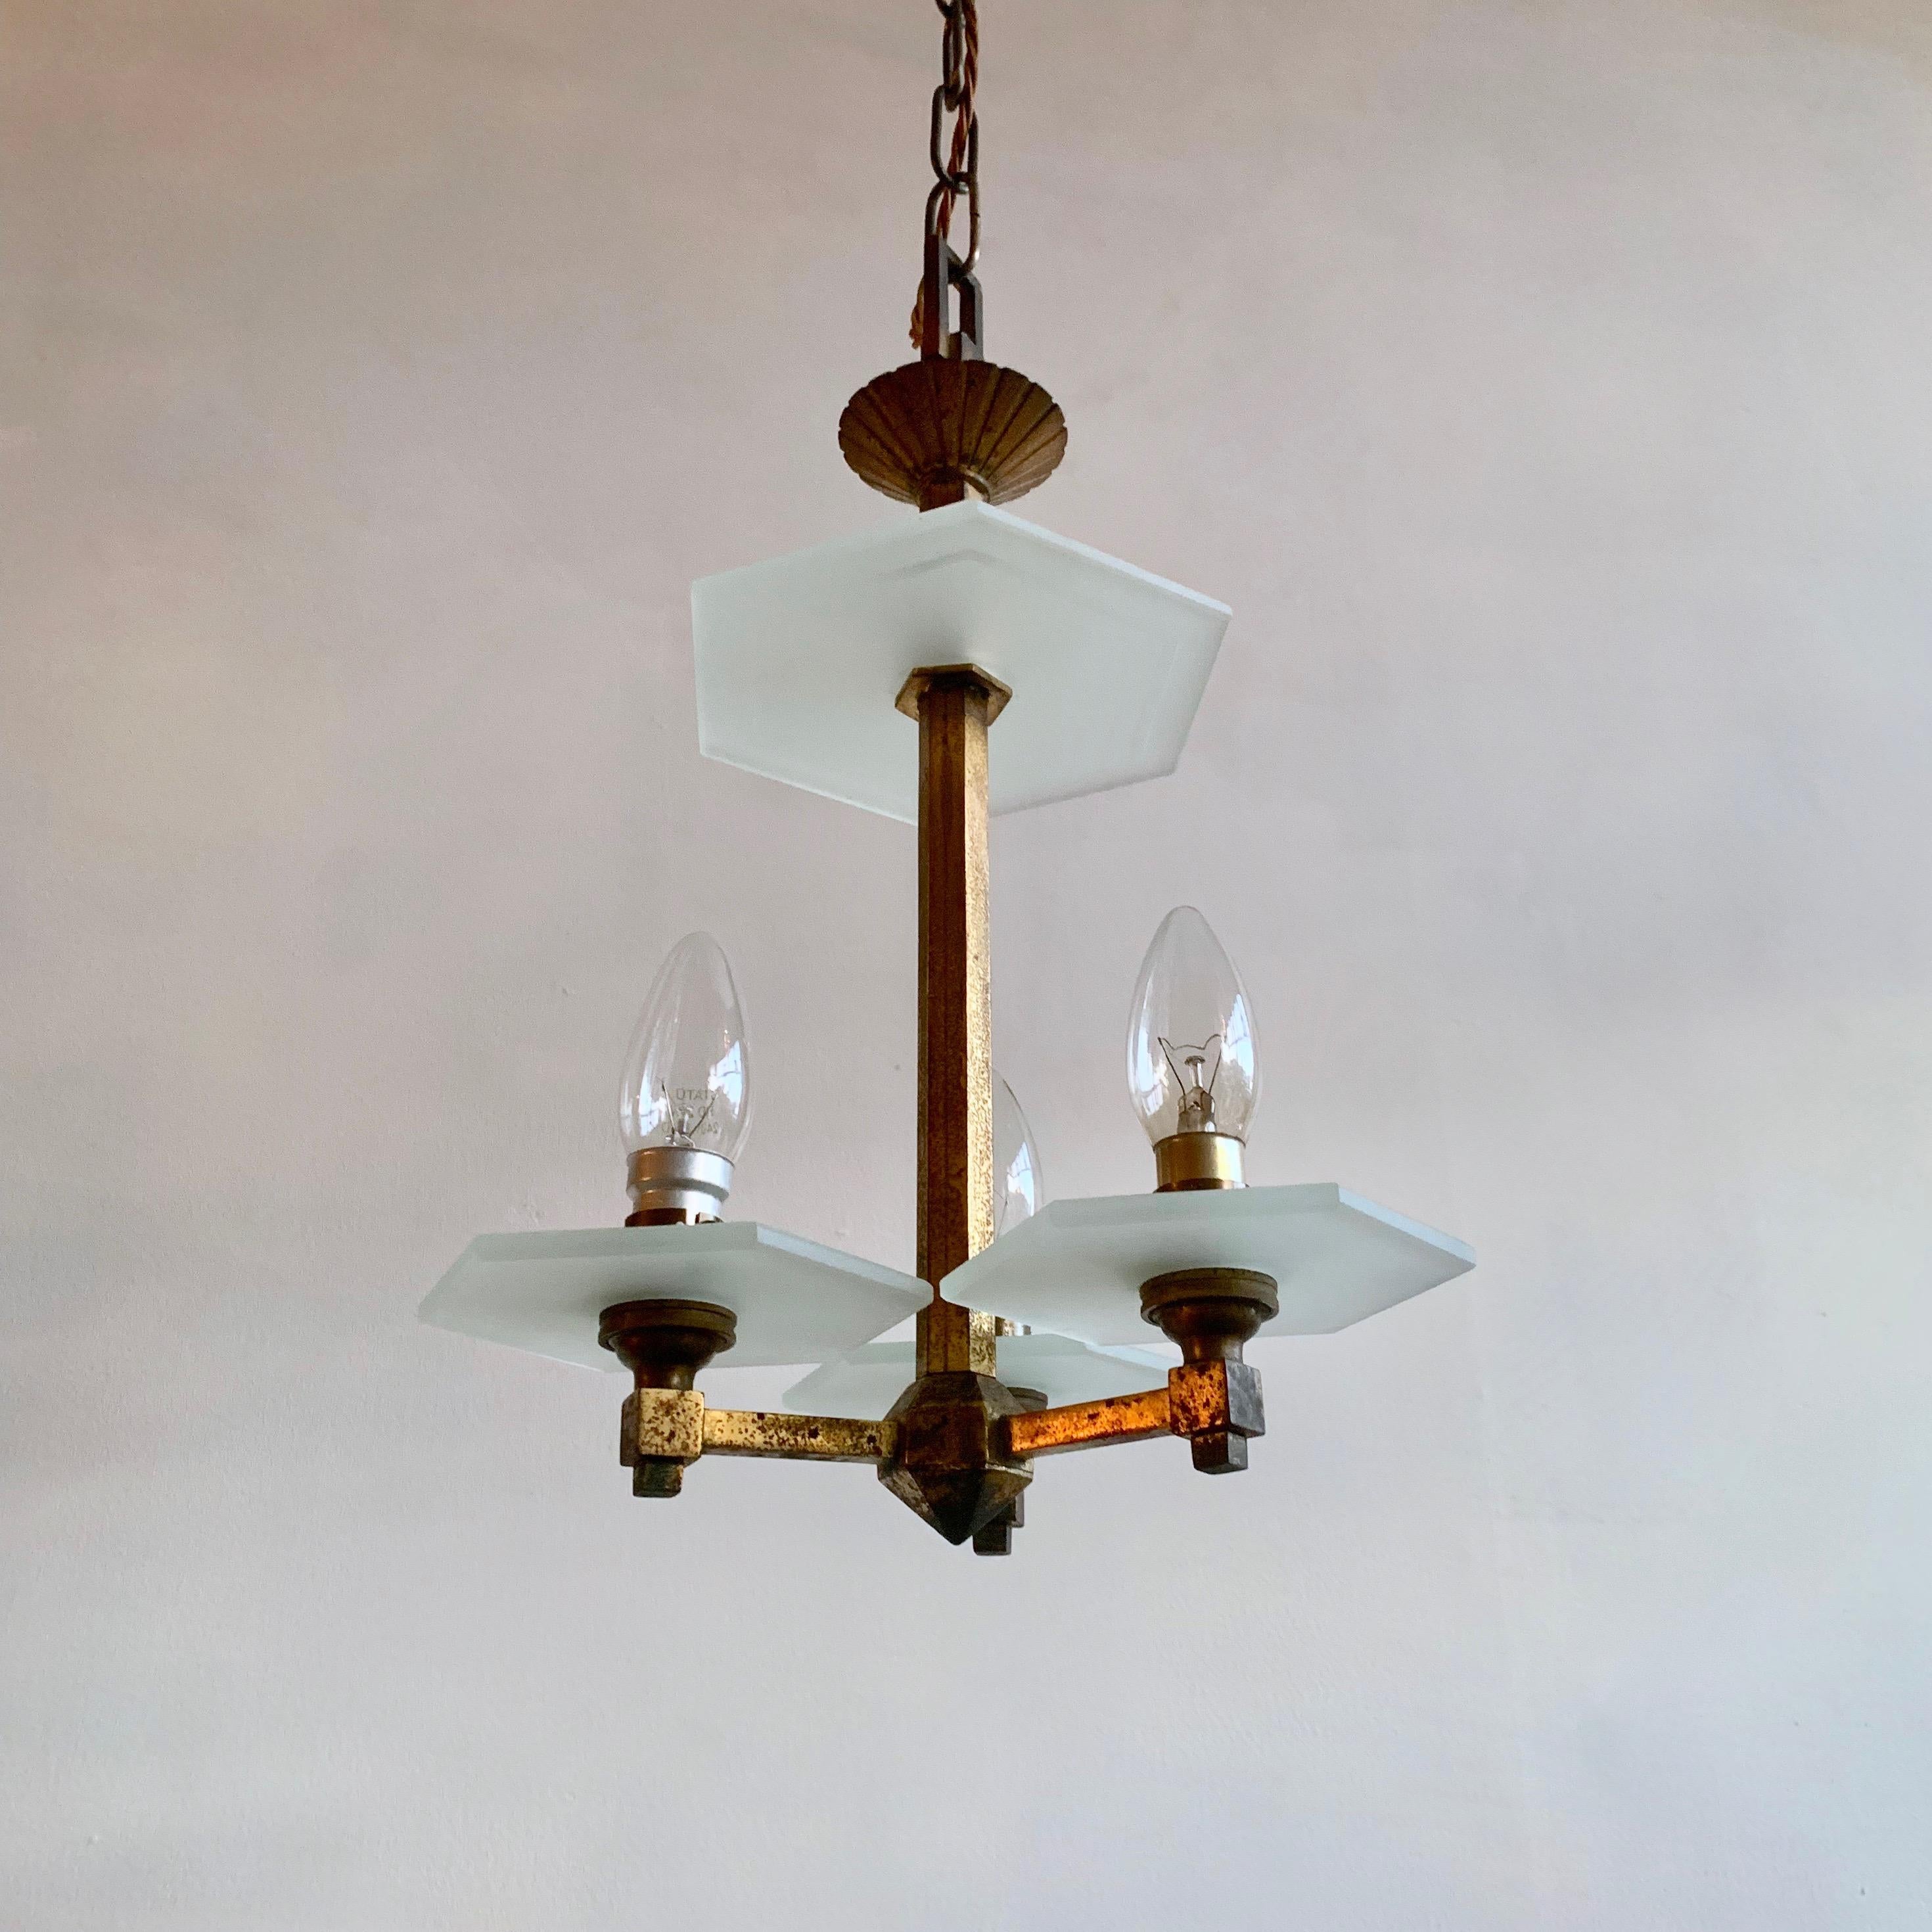 1930s English Art Deco Chandelier In Good Condition For Sale In Stockport, GB